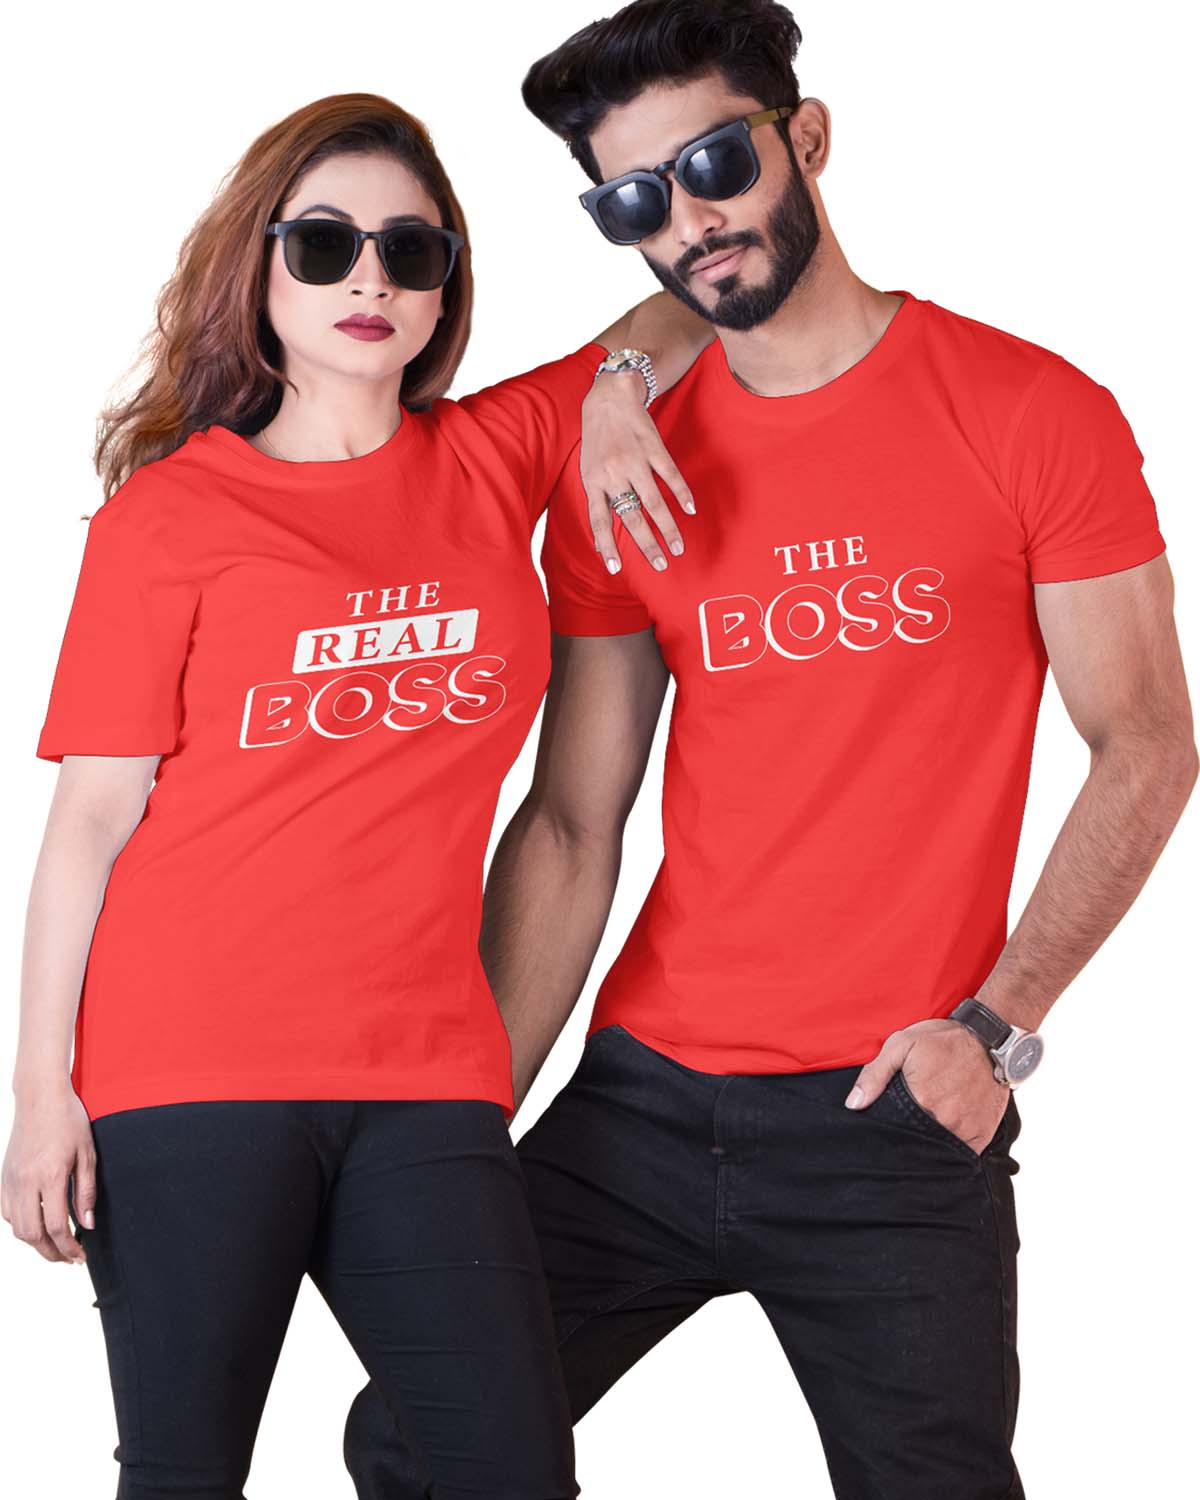 The Boss The Real Boss Couple T-Shirt